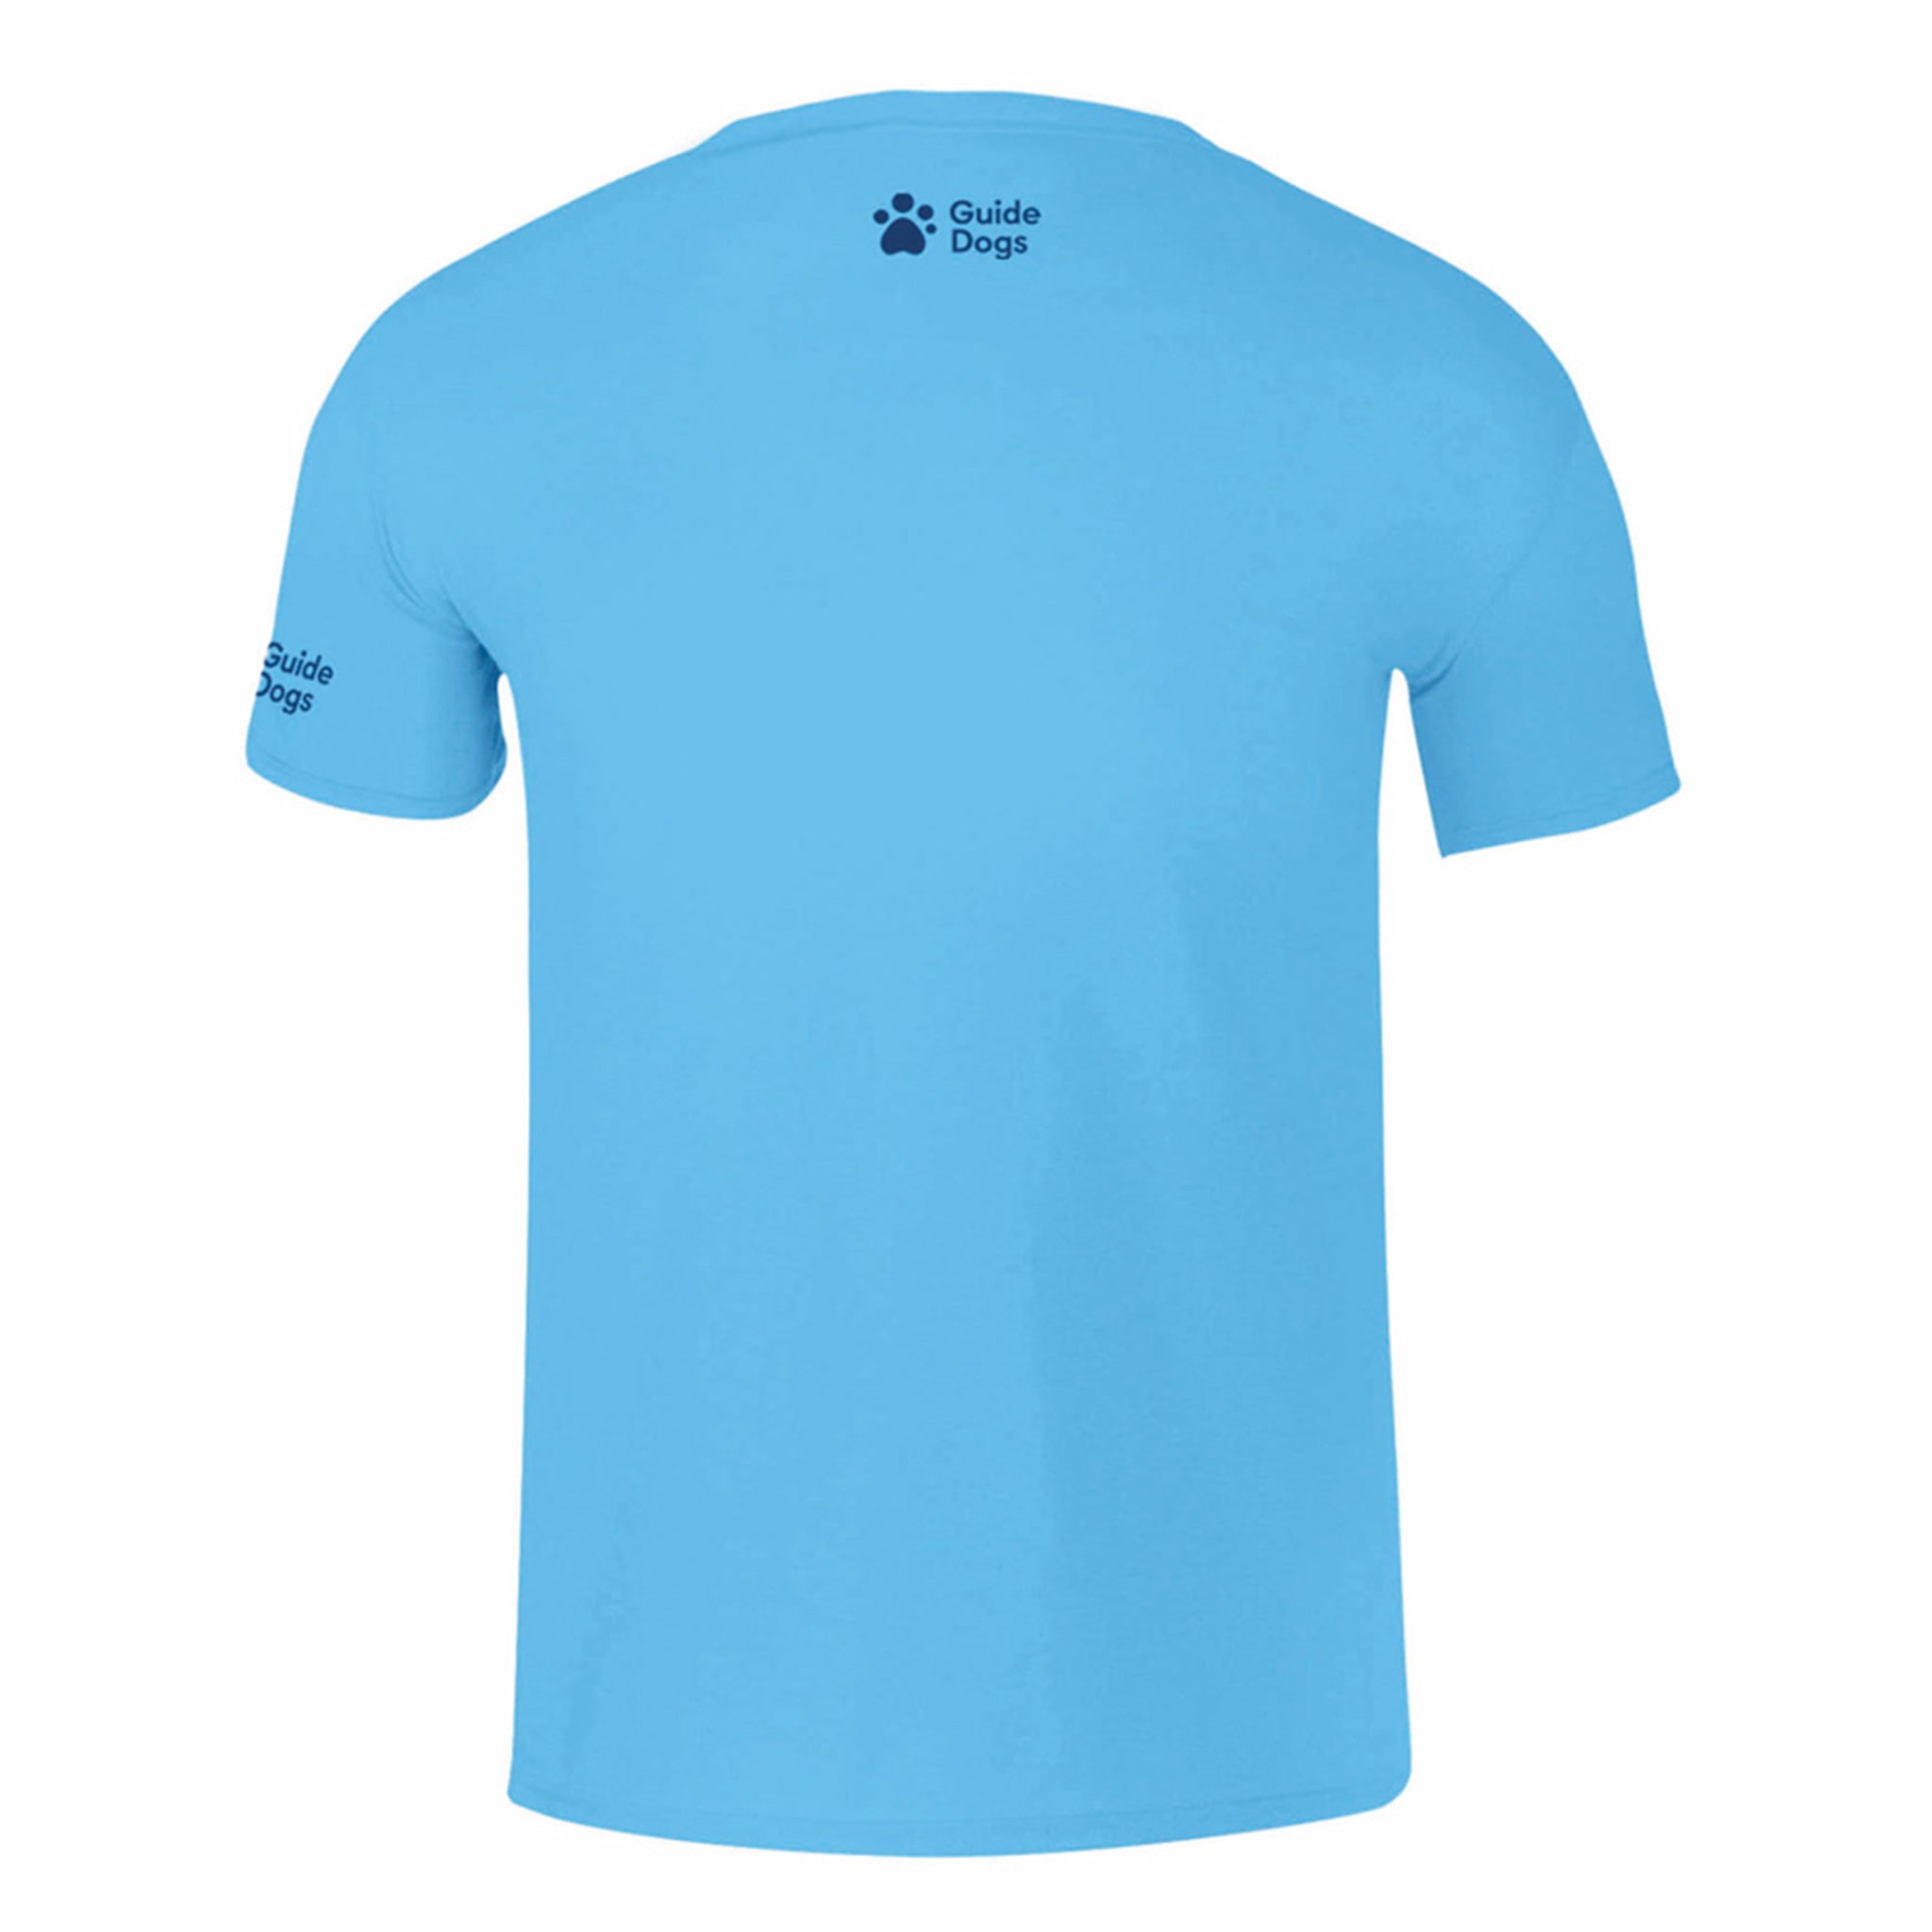 A close up of the back of a blue men's t-shirt, the Guide Dogs logo is printed on the left sleeve and back of the collar.